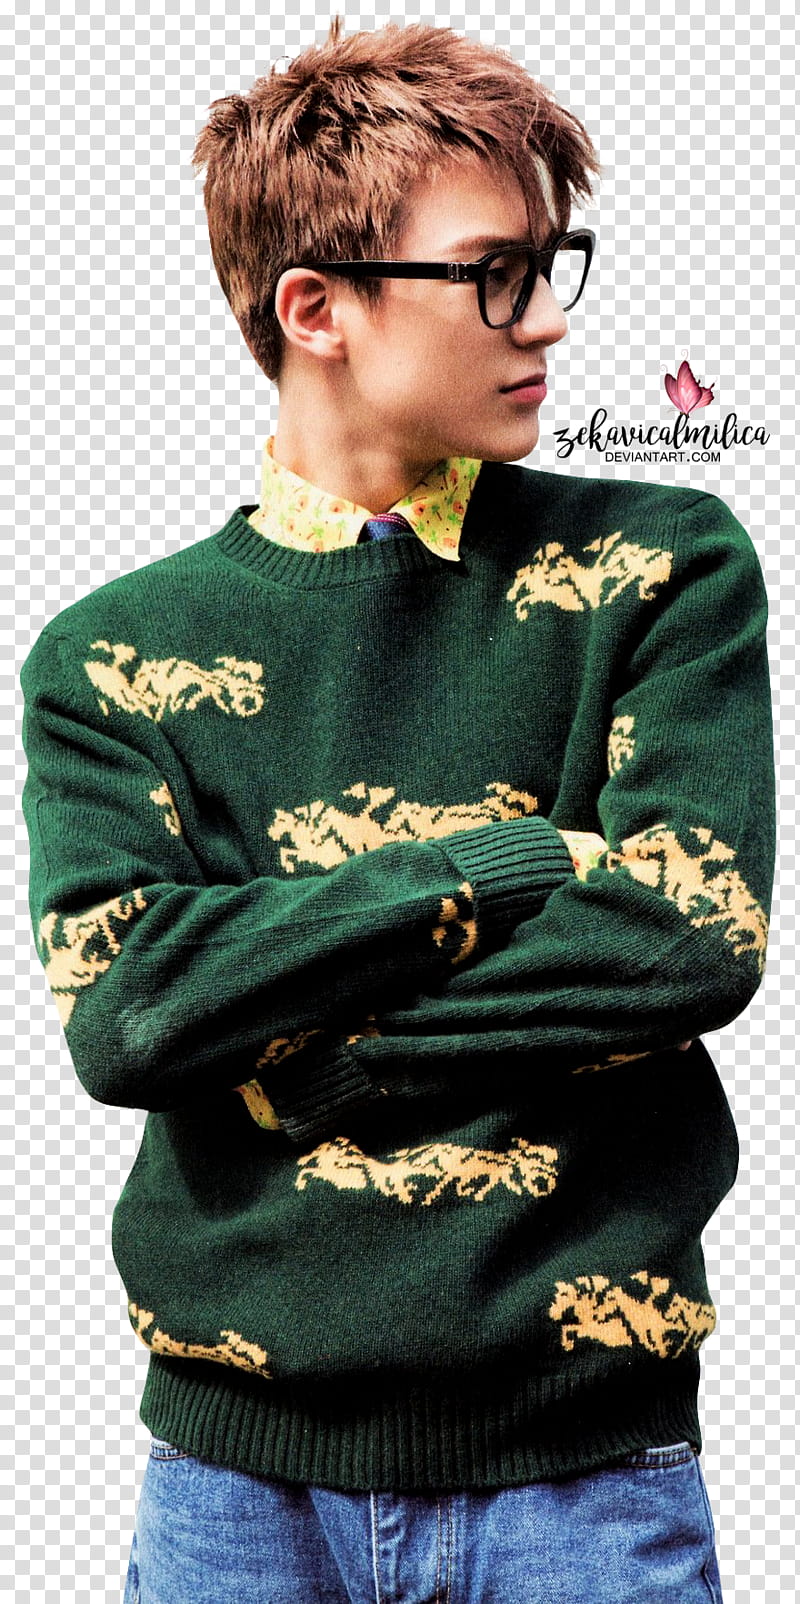 NCT Jeno  Season Greetings, man wearing green and brown horses graphic sweatshirt cross hands transparent background PNG clipart